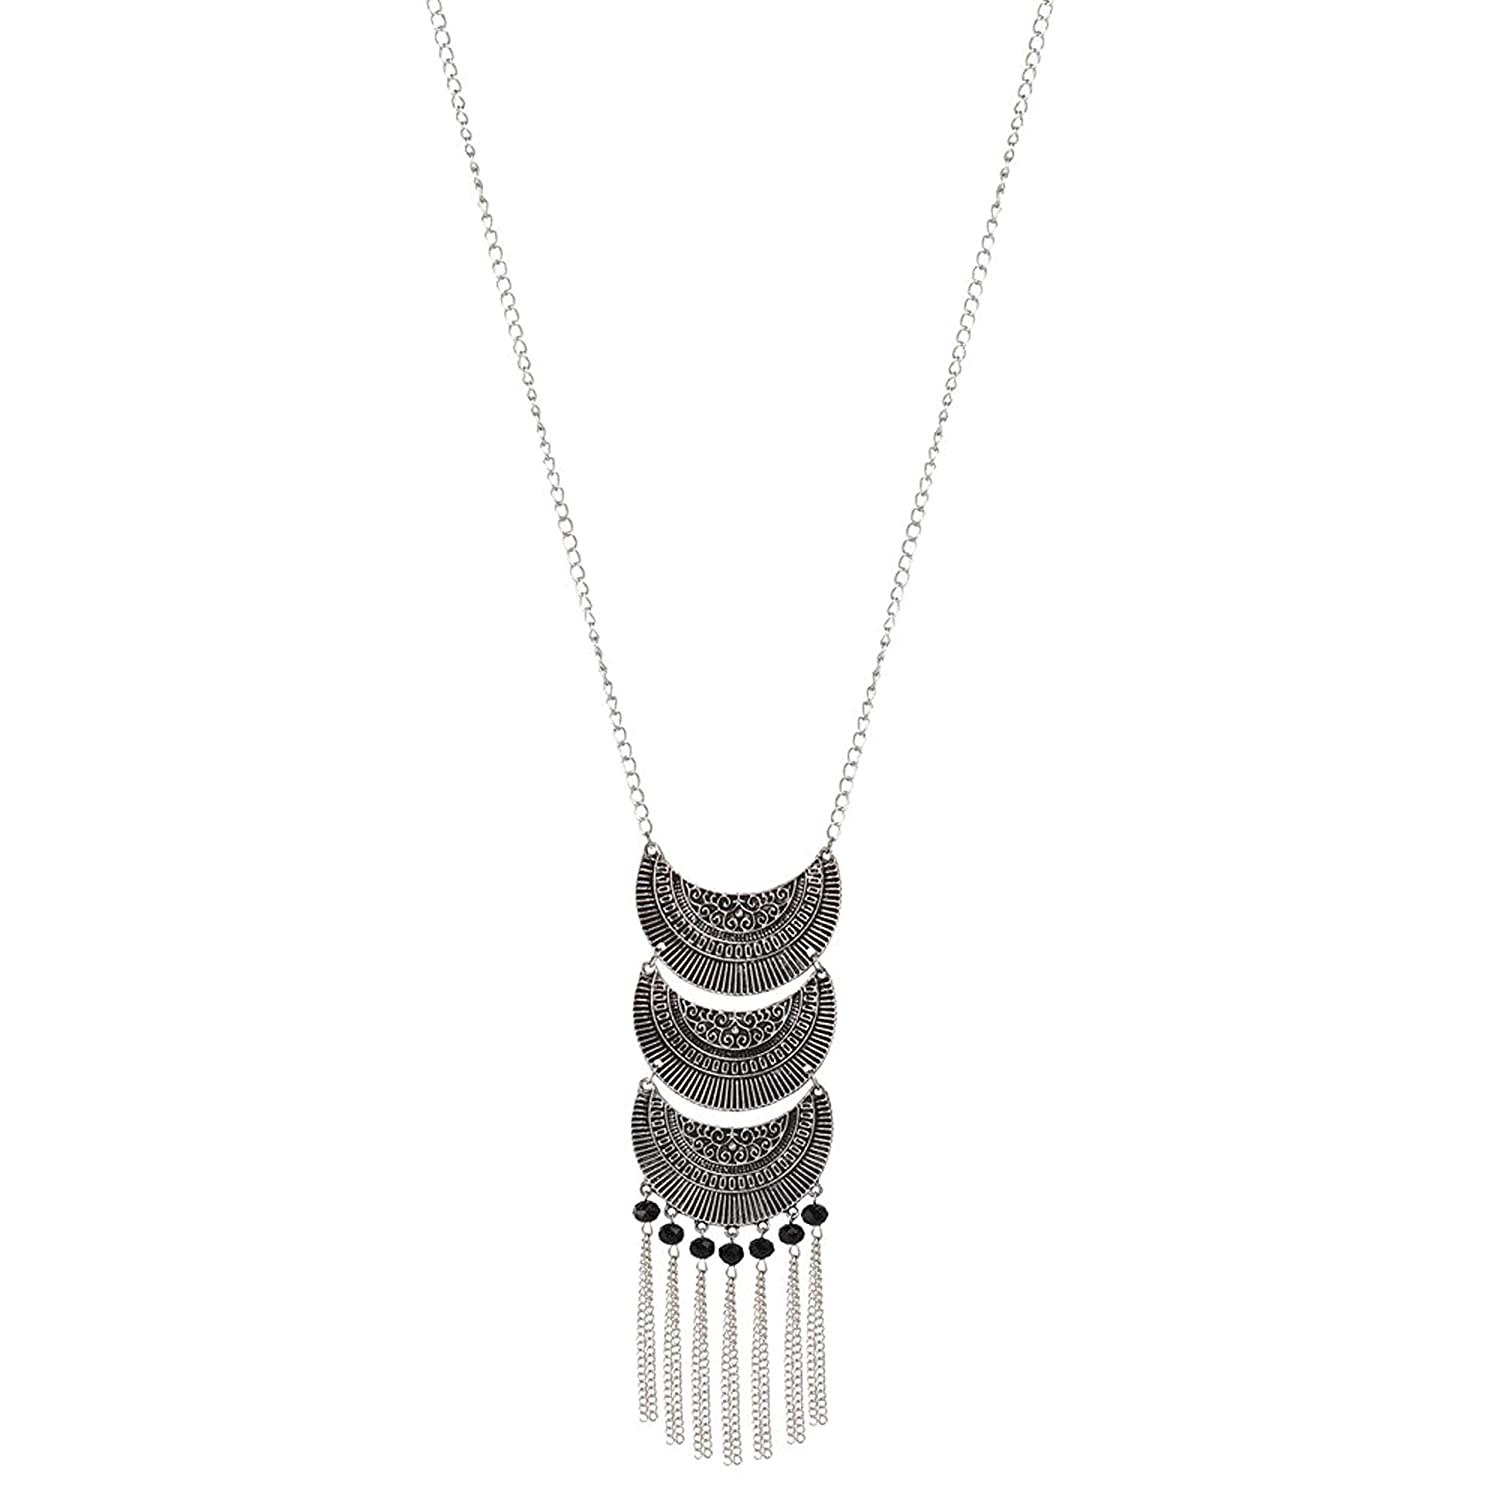 A long dangling necklace in black and oxidised metal.